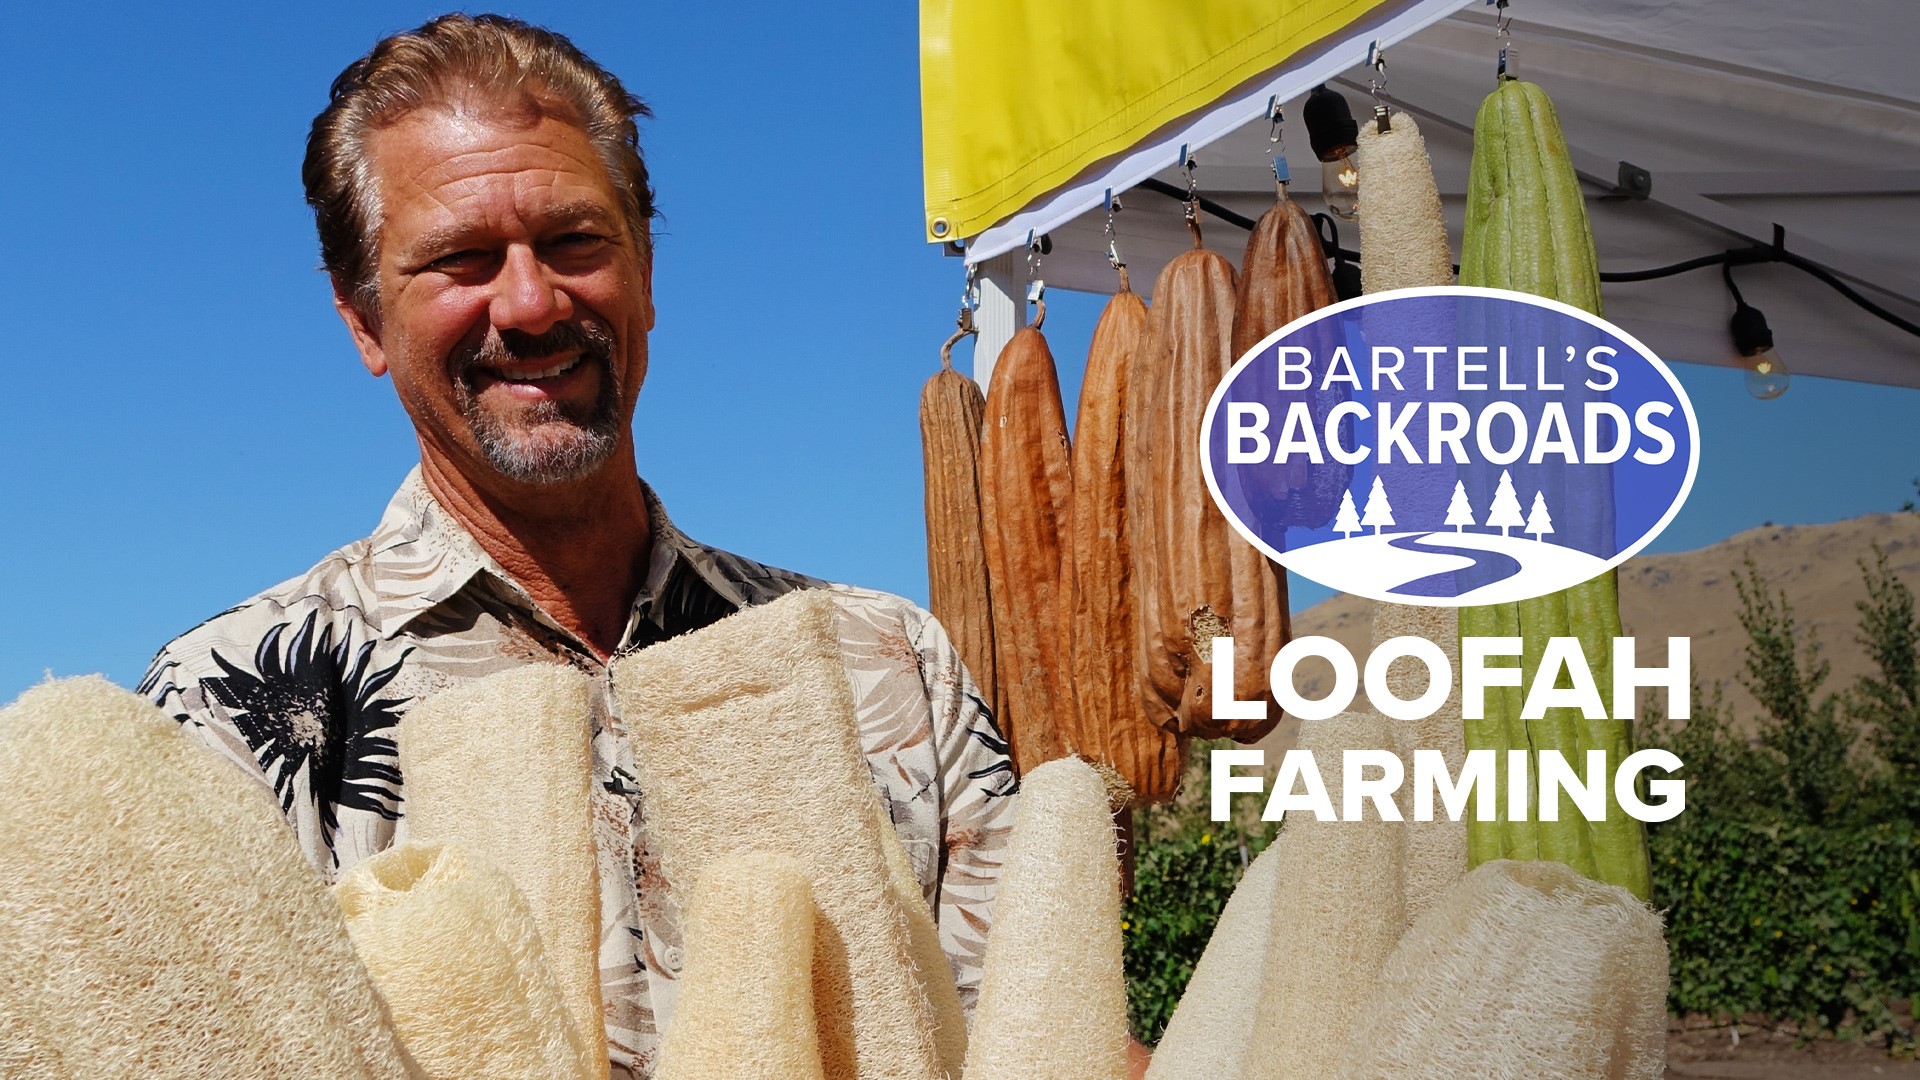 Did you know the original loofah is a plant? Luffa Gardens in Reedley is one of the few farms in the state growing the all-natural sponges on a large scale.